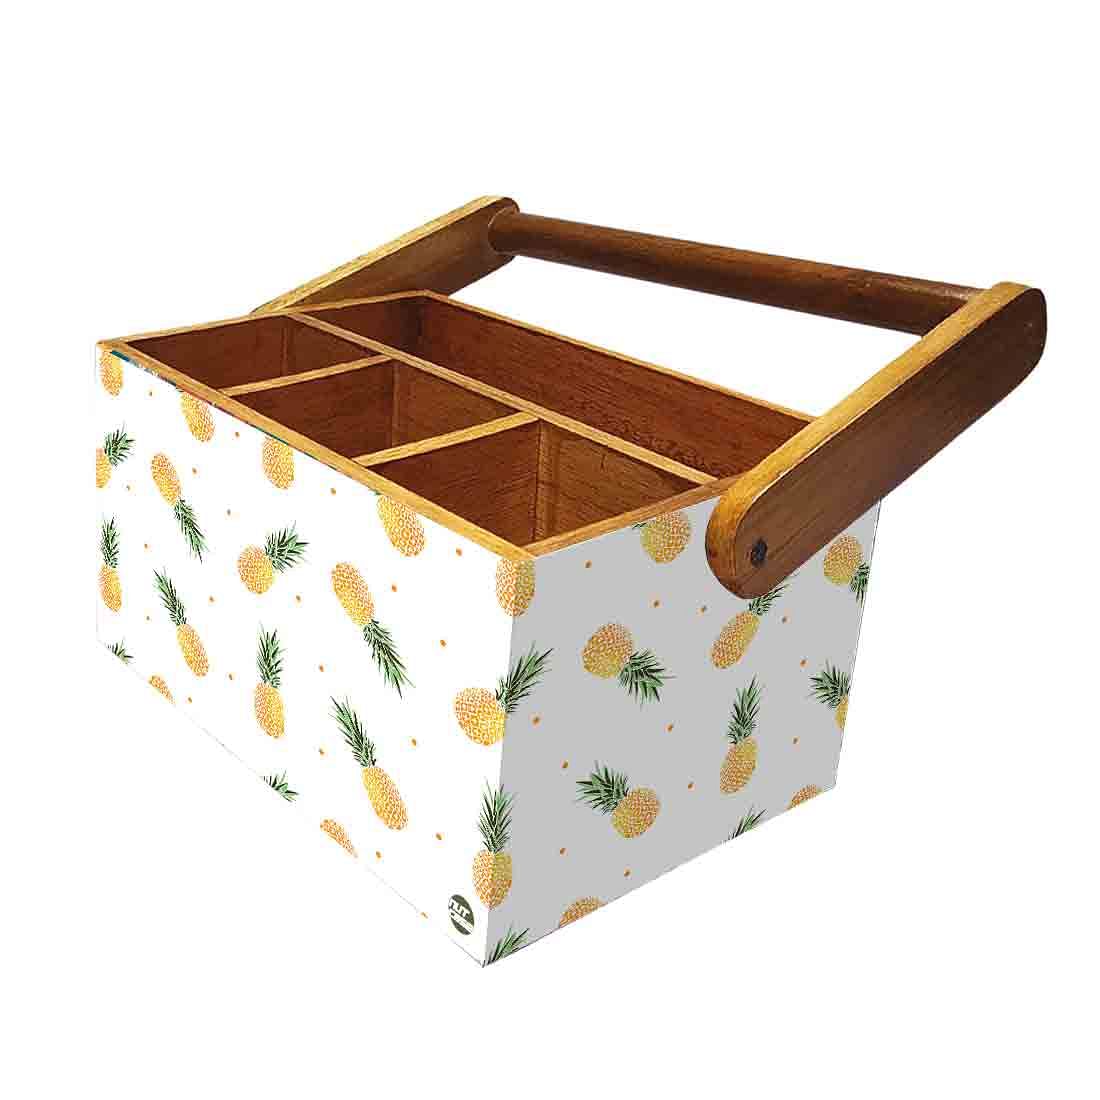 Wooden Cutlery Stand With Napkin Holder Handle for Kitchen Storage - Pineapples Nutcase